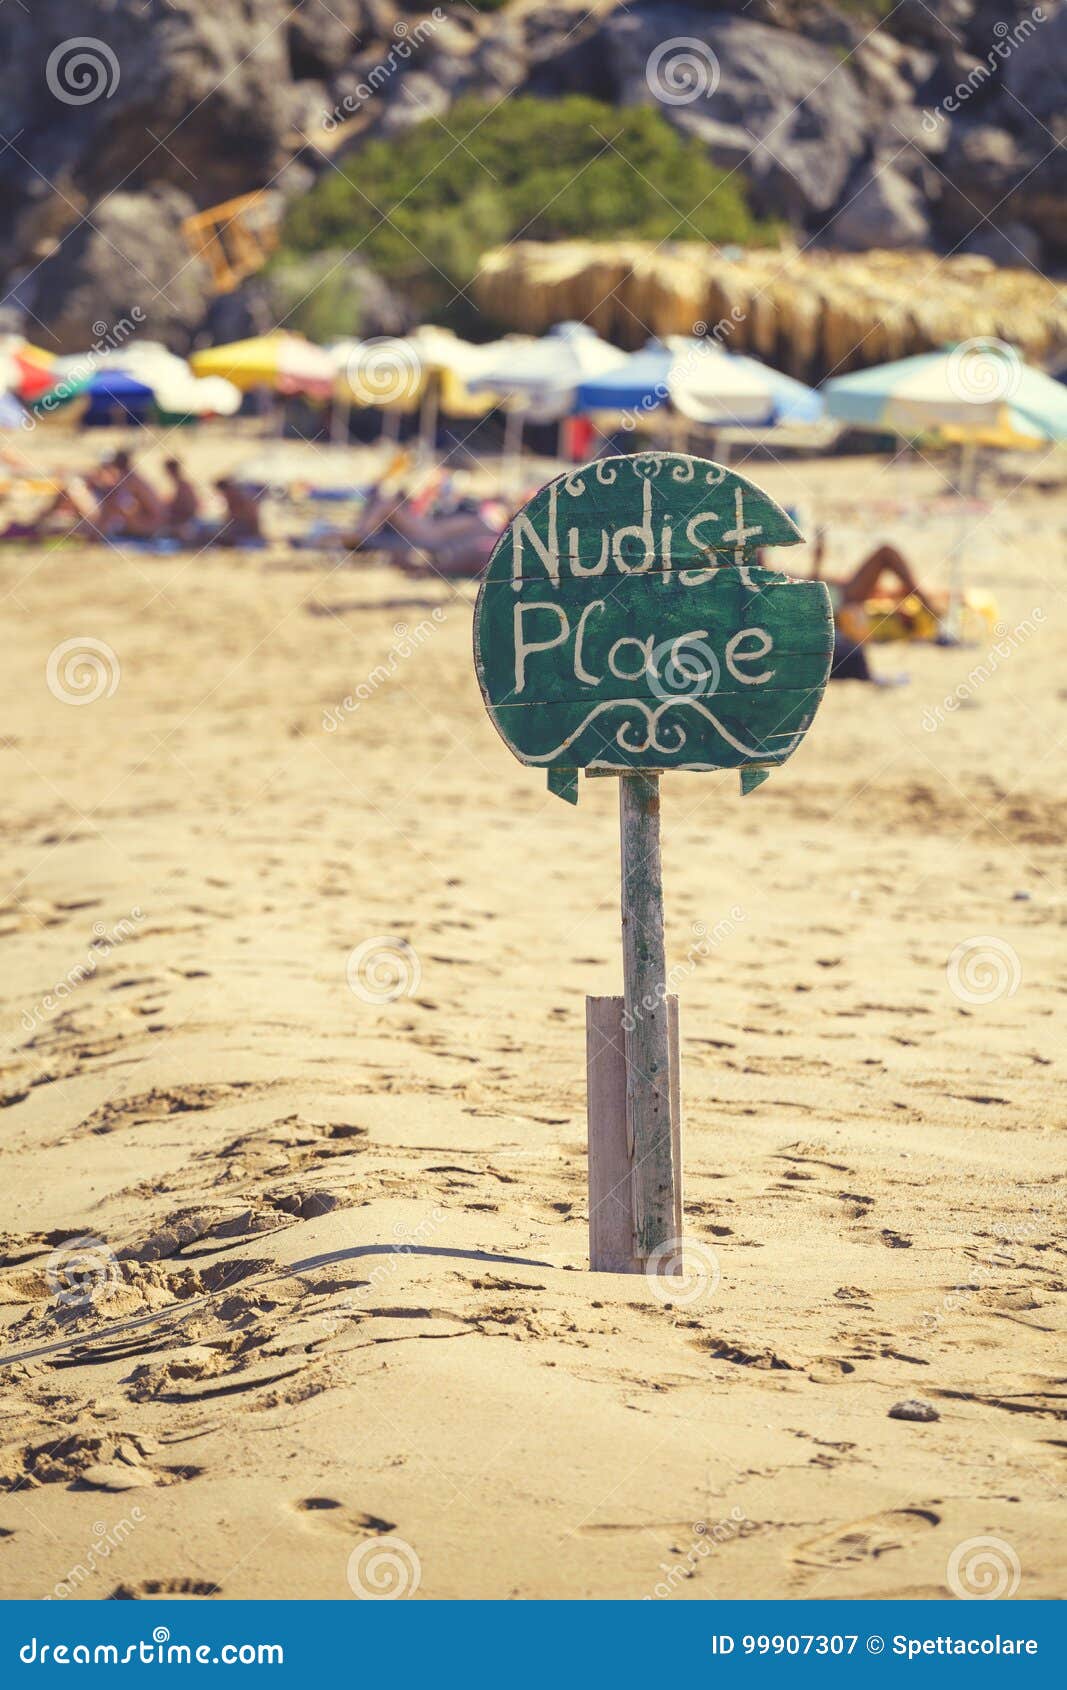 Nudist Place Wooden Sign 3 Stock Photo photo